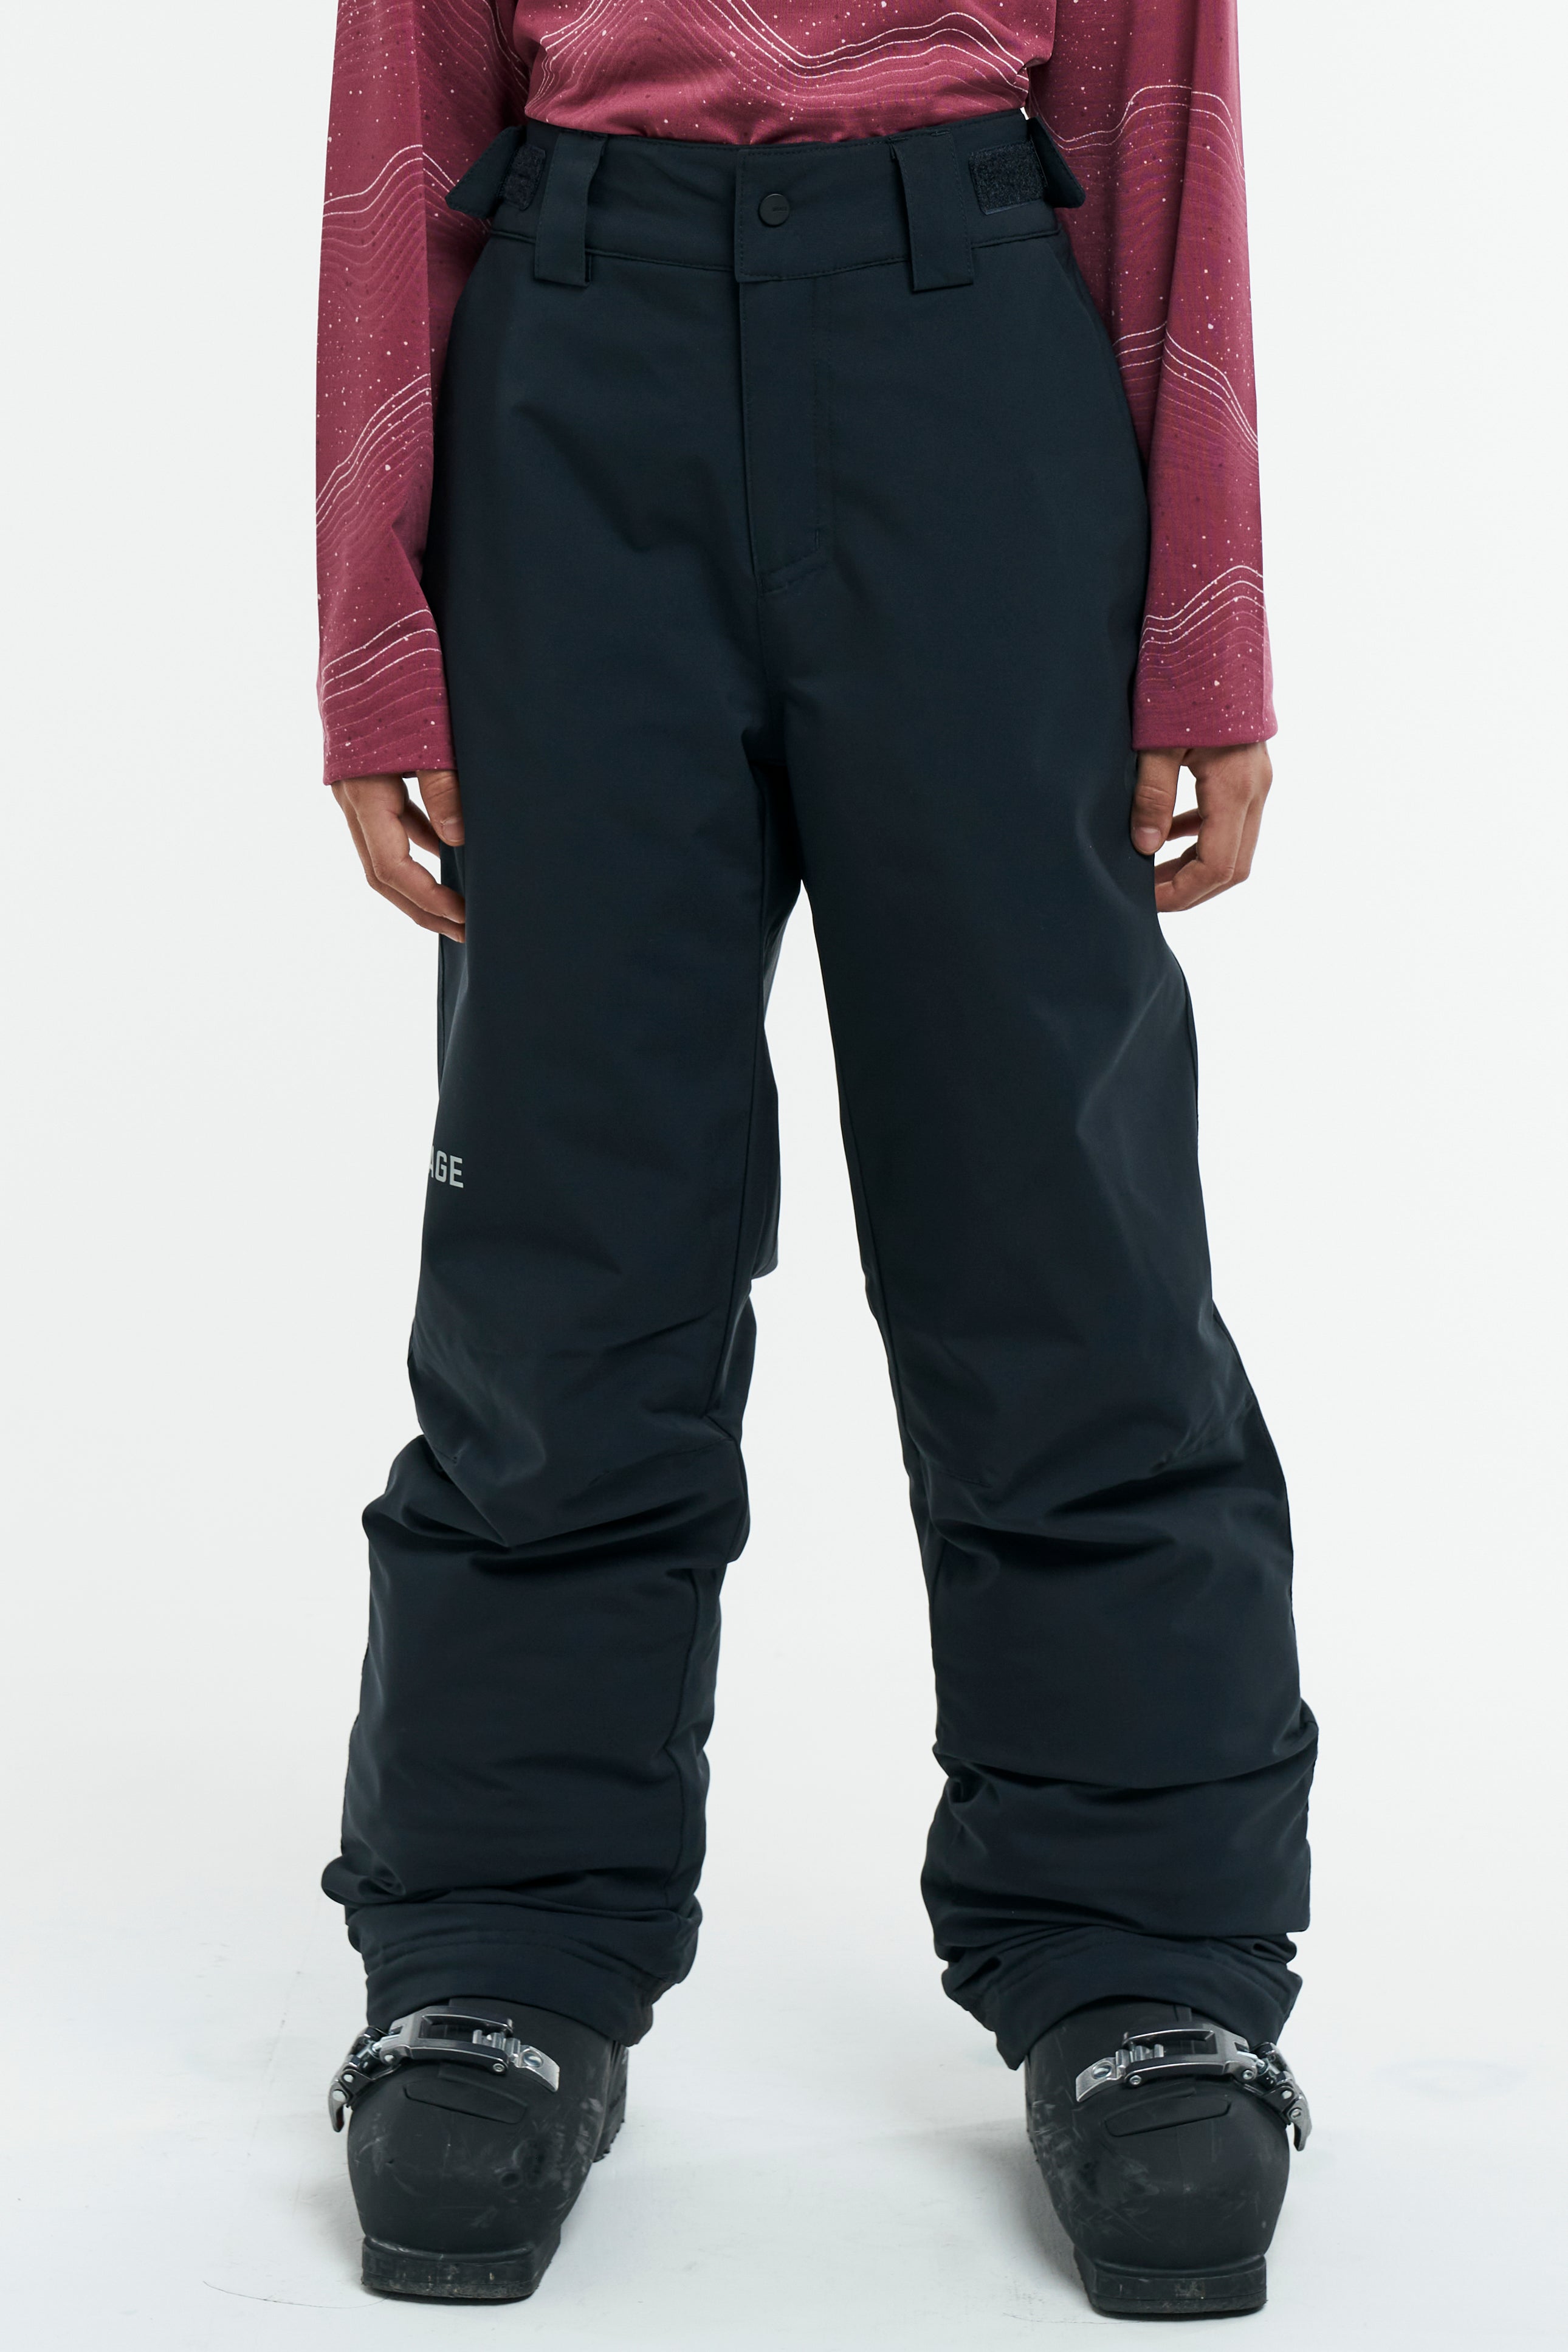 Orage Girls Comi Insulated Pant - Winter 2022/2023